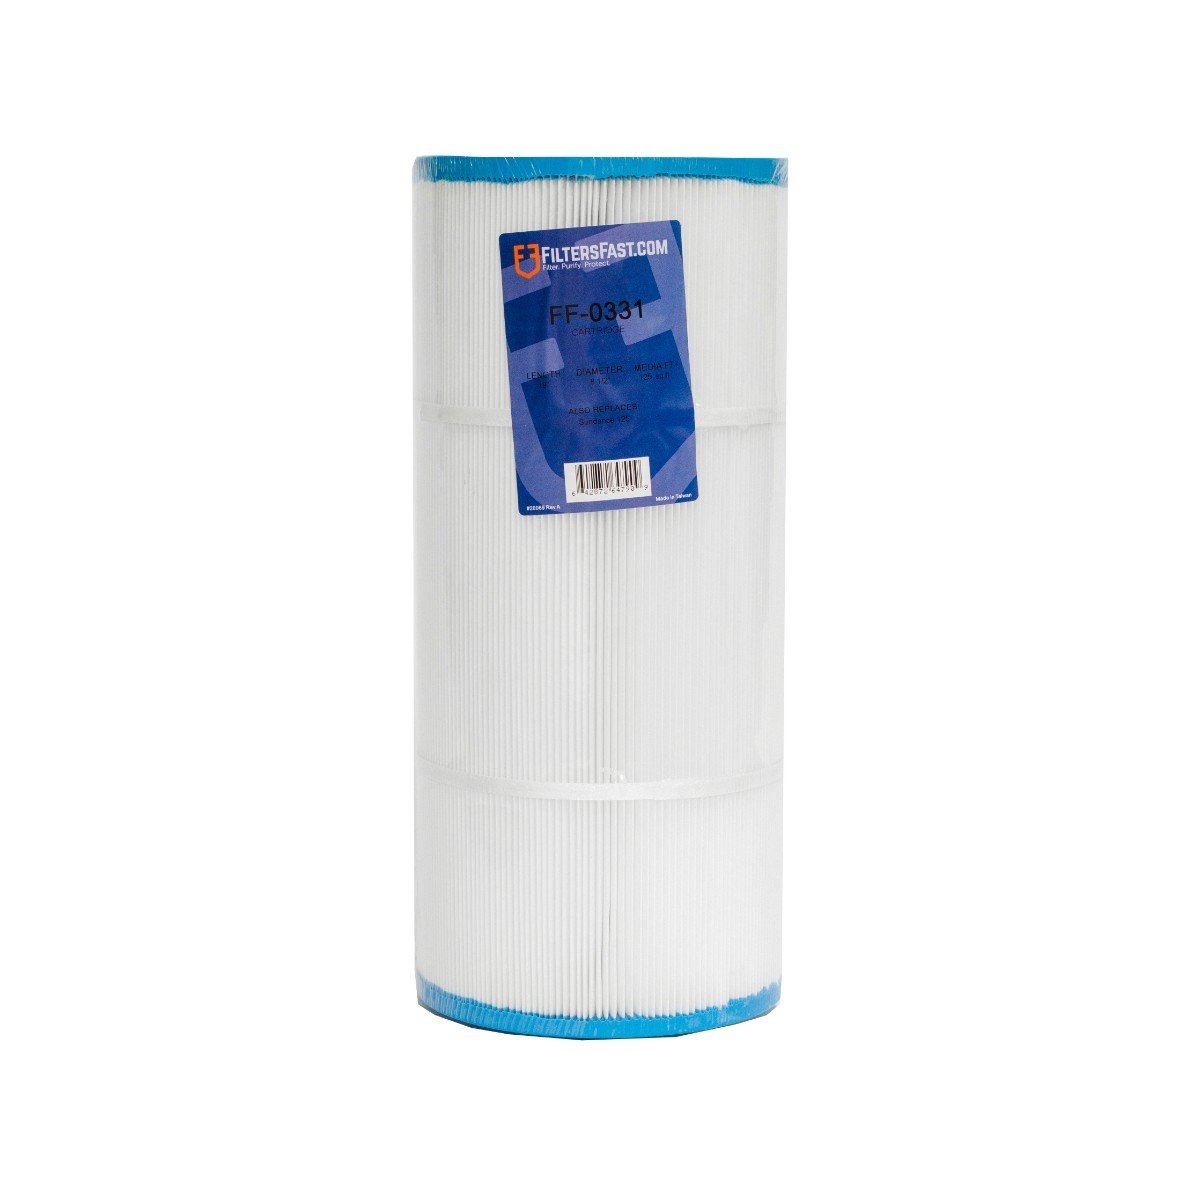 Filters Fast&reg; FF-0331 Replacement For Sundance Spa 6540-488